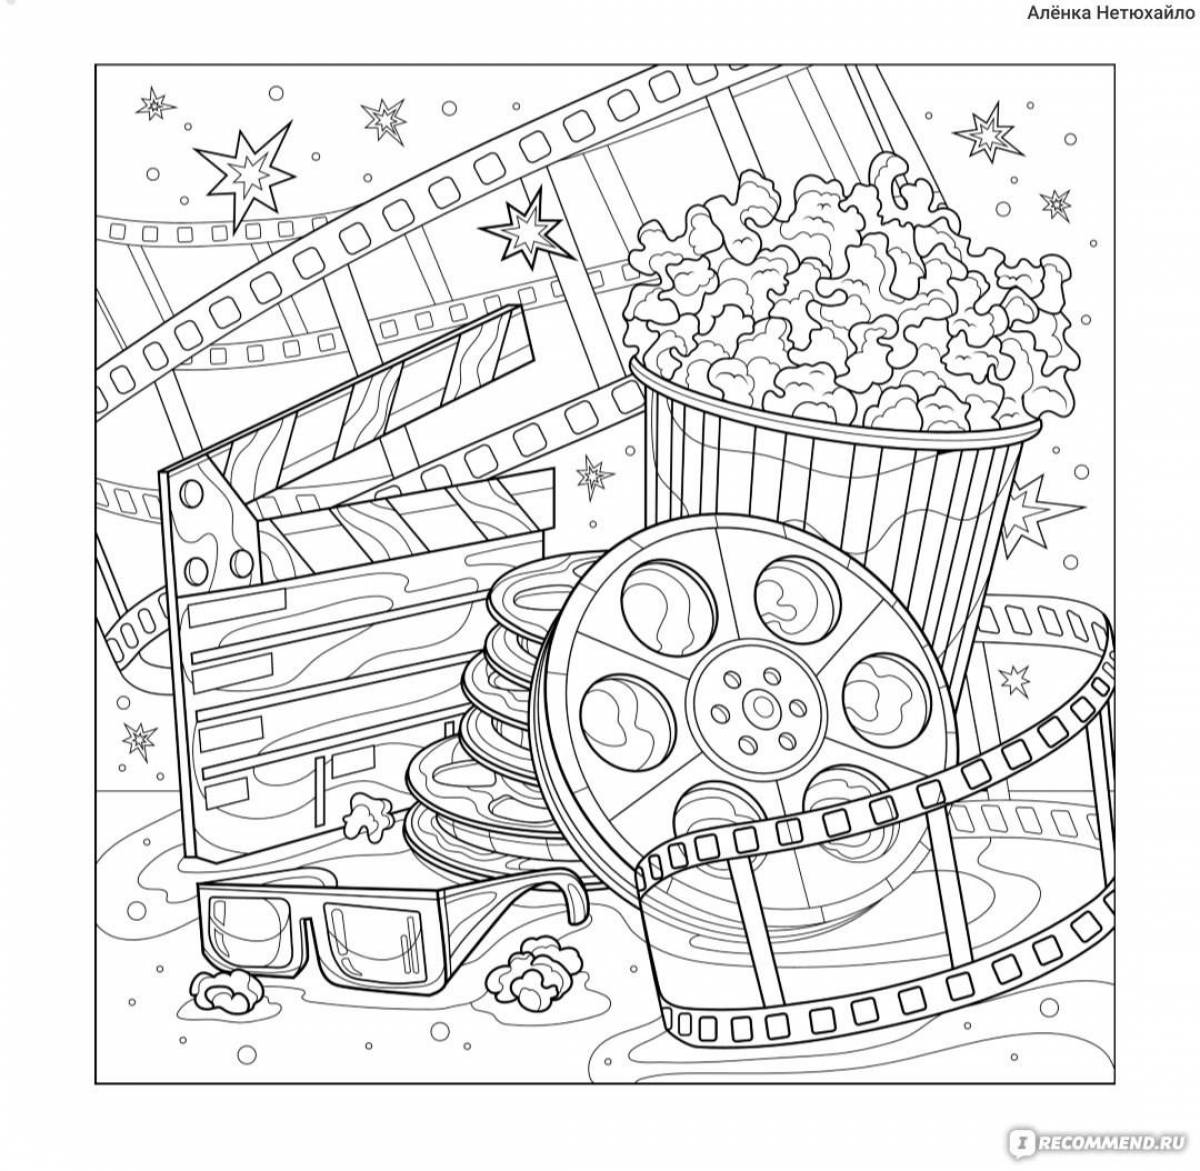 Stimulating coloring page happy color game